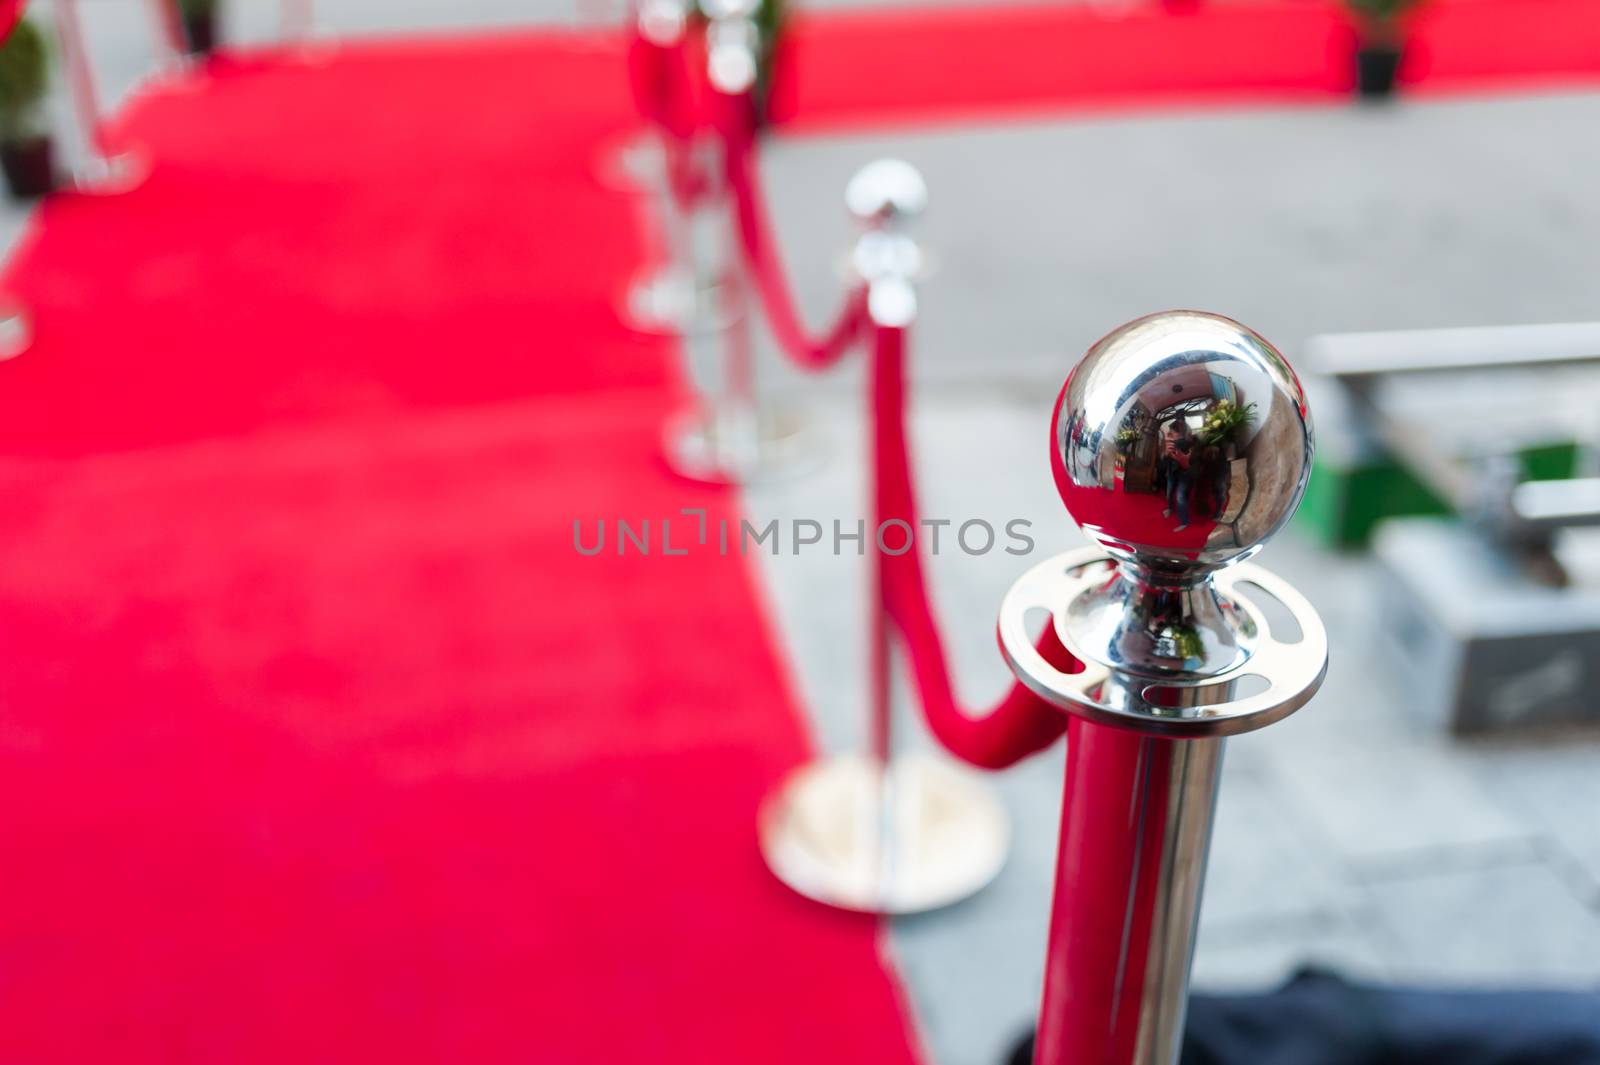 Event party.Red carpet between rope barriers in the success party.